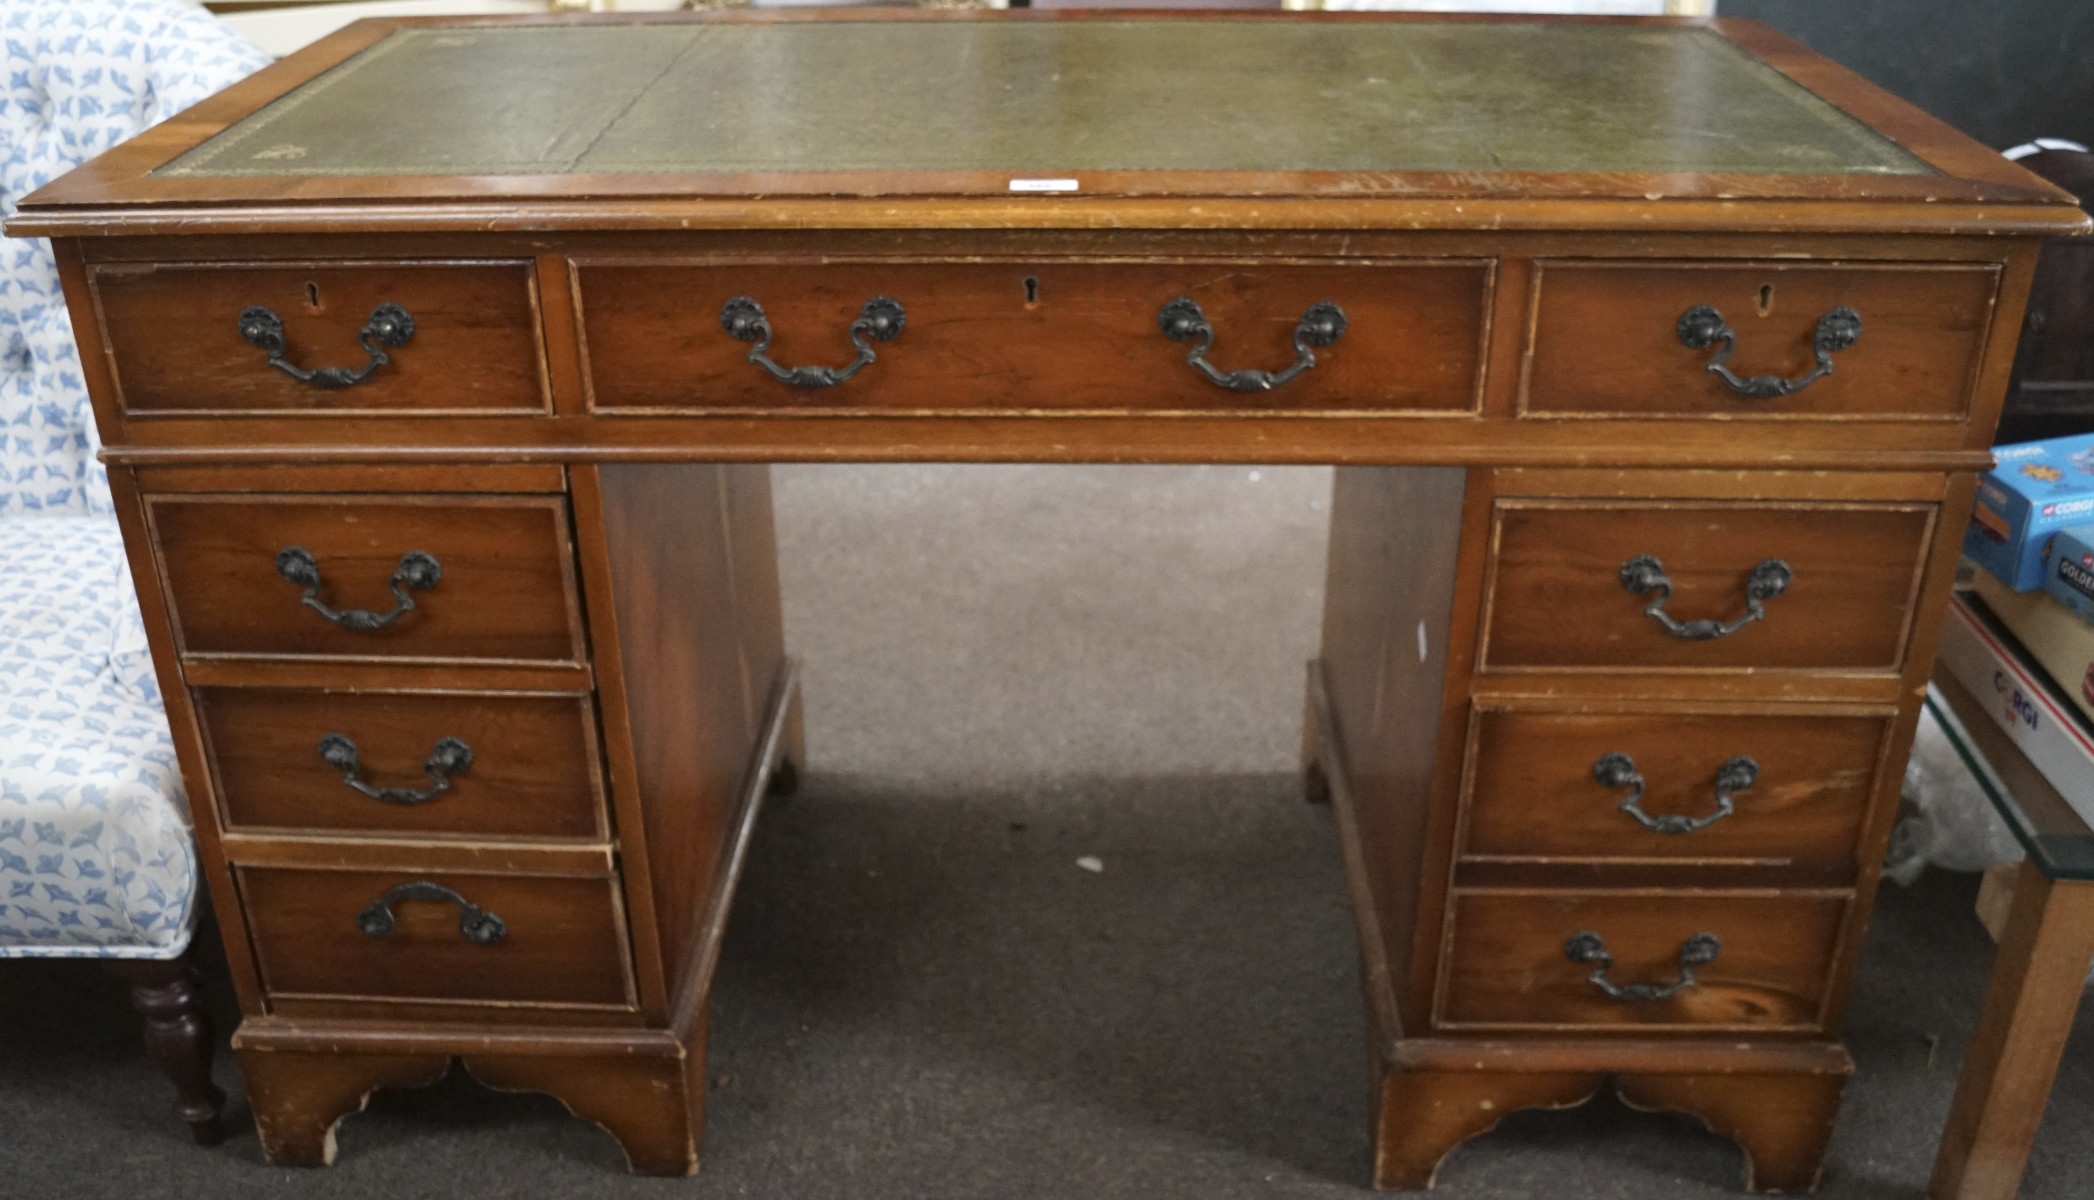 A mid-20th century leather-topped desk.